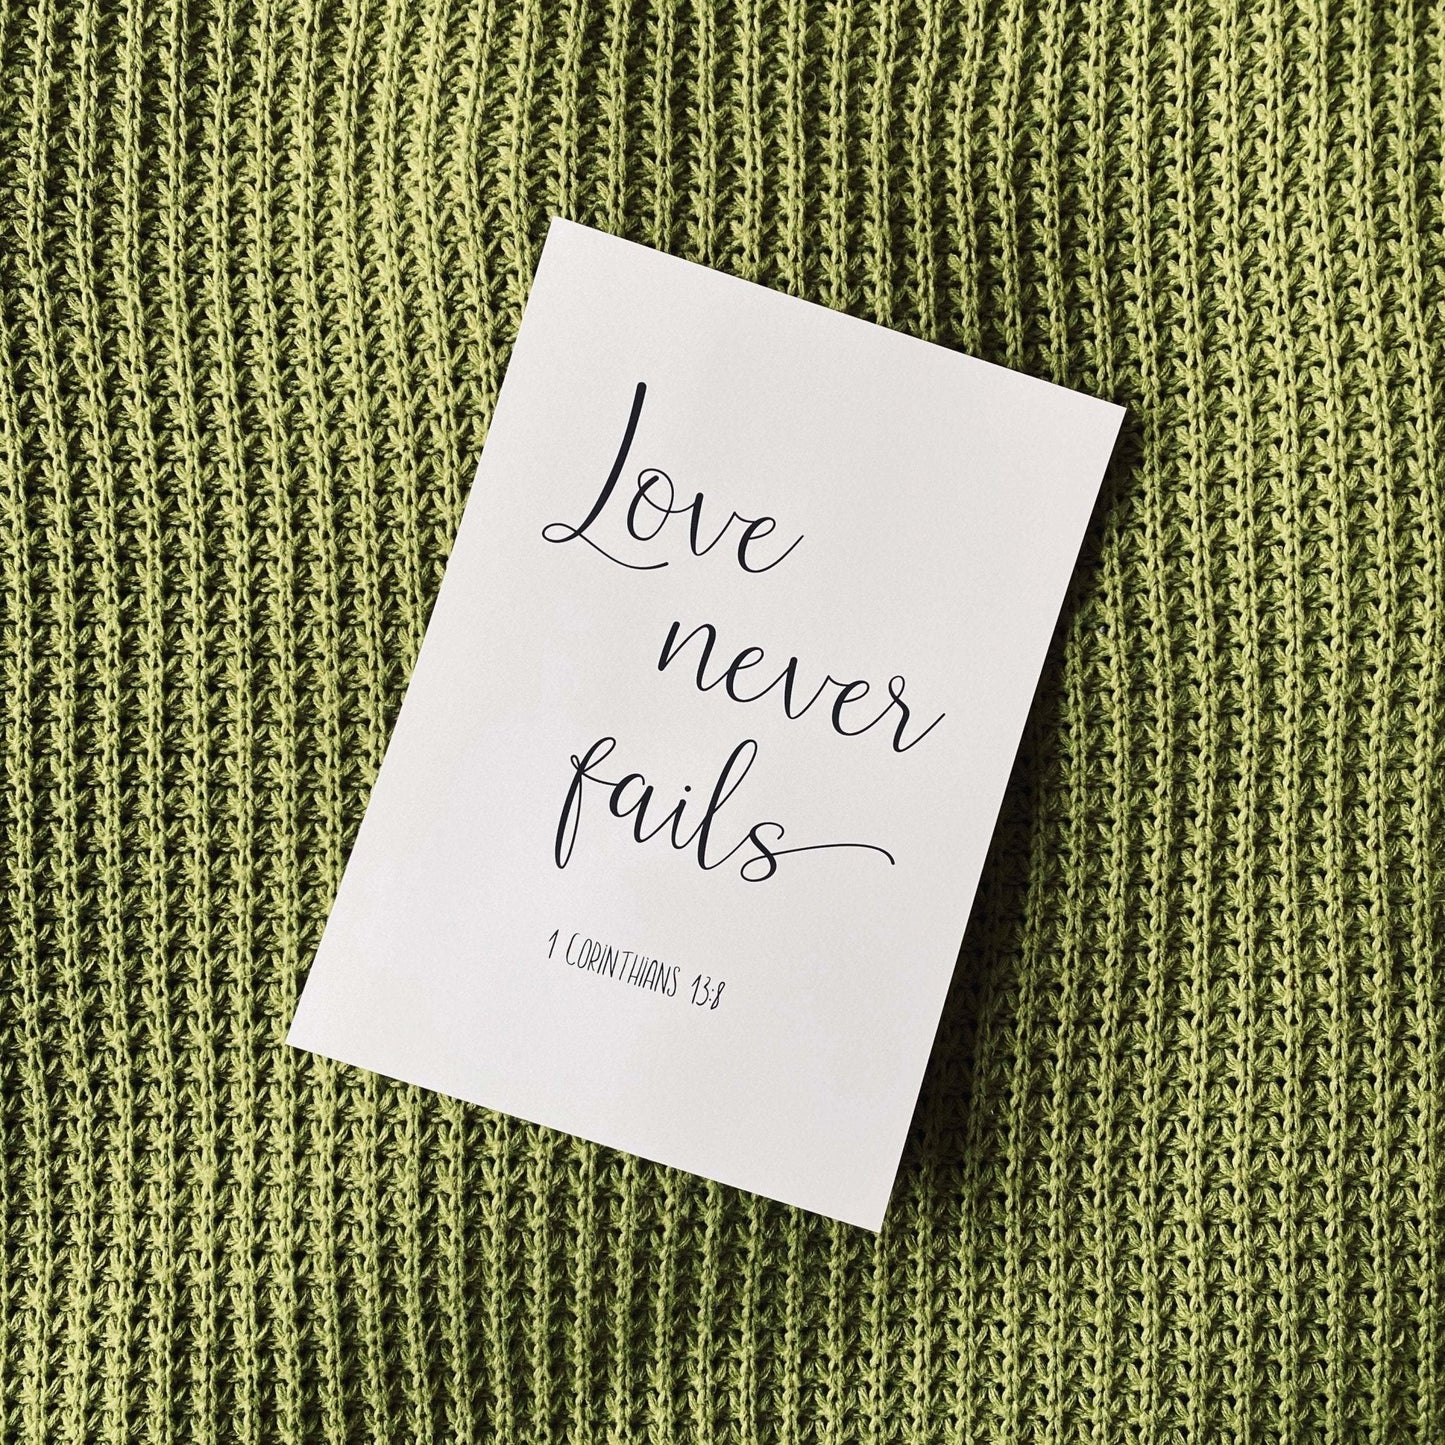 Love Never Fails Bible Verse Print - Dolly and Fred Designs